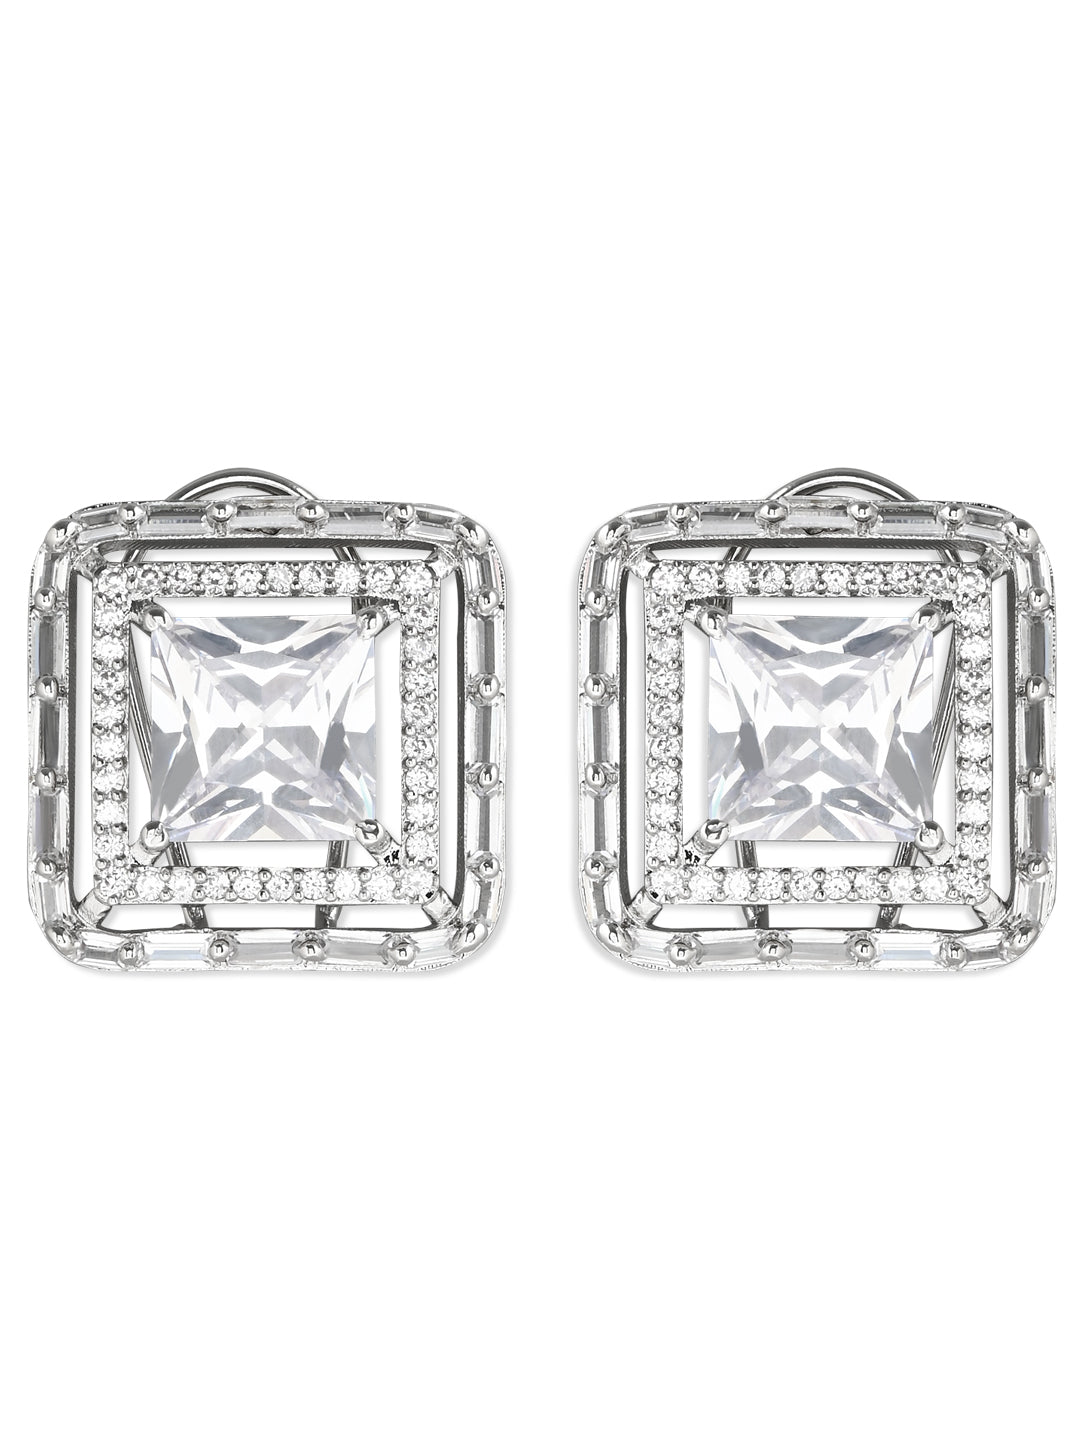 Women's Silver Plated Glittering Crystal Ad Stone Studs Earrings (E3071Zg) - I Jewels